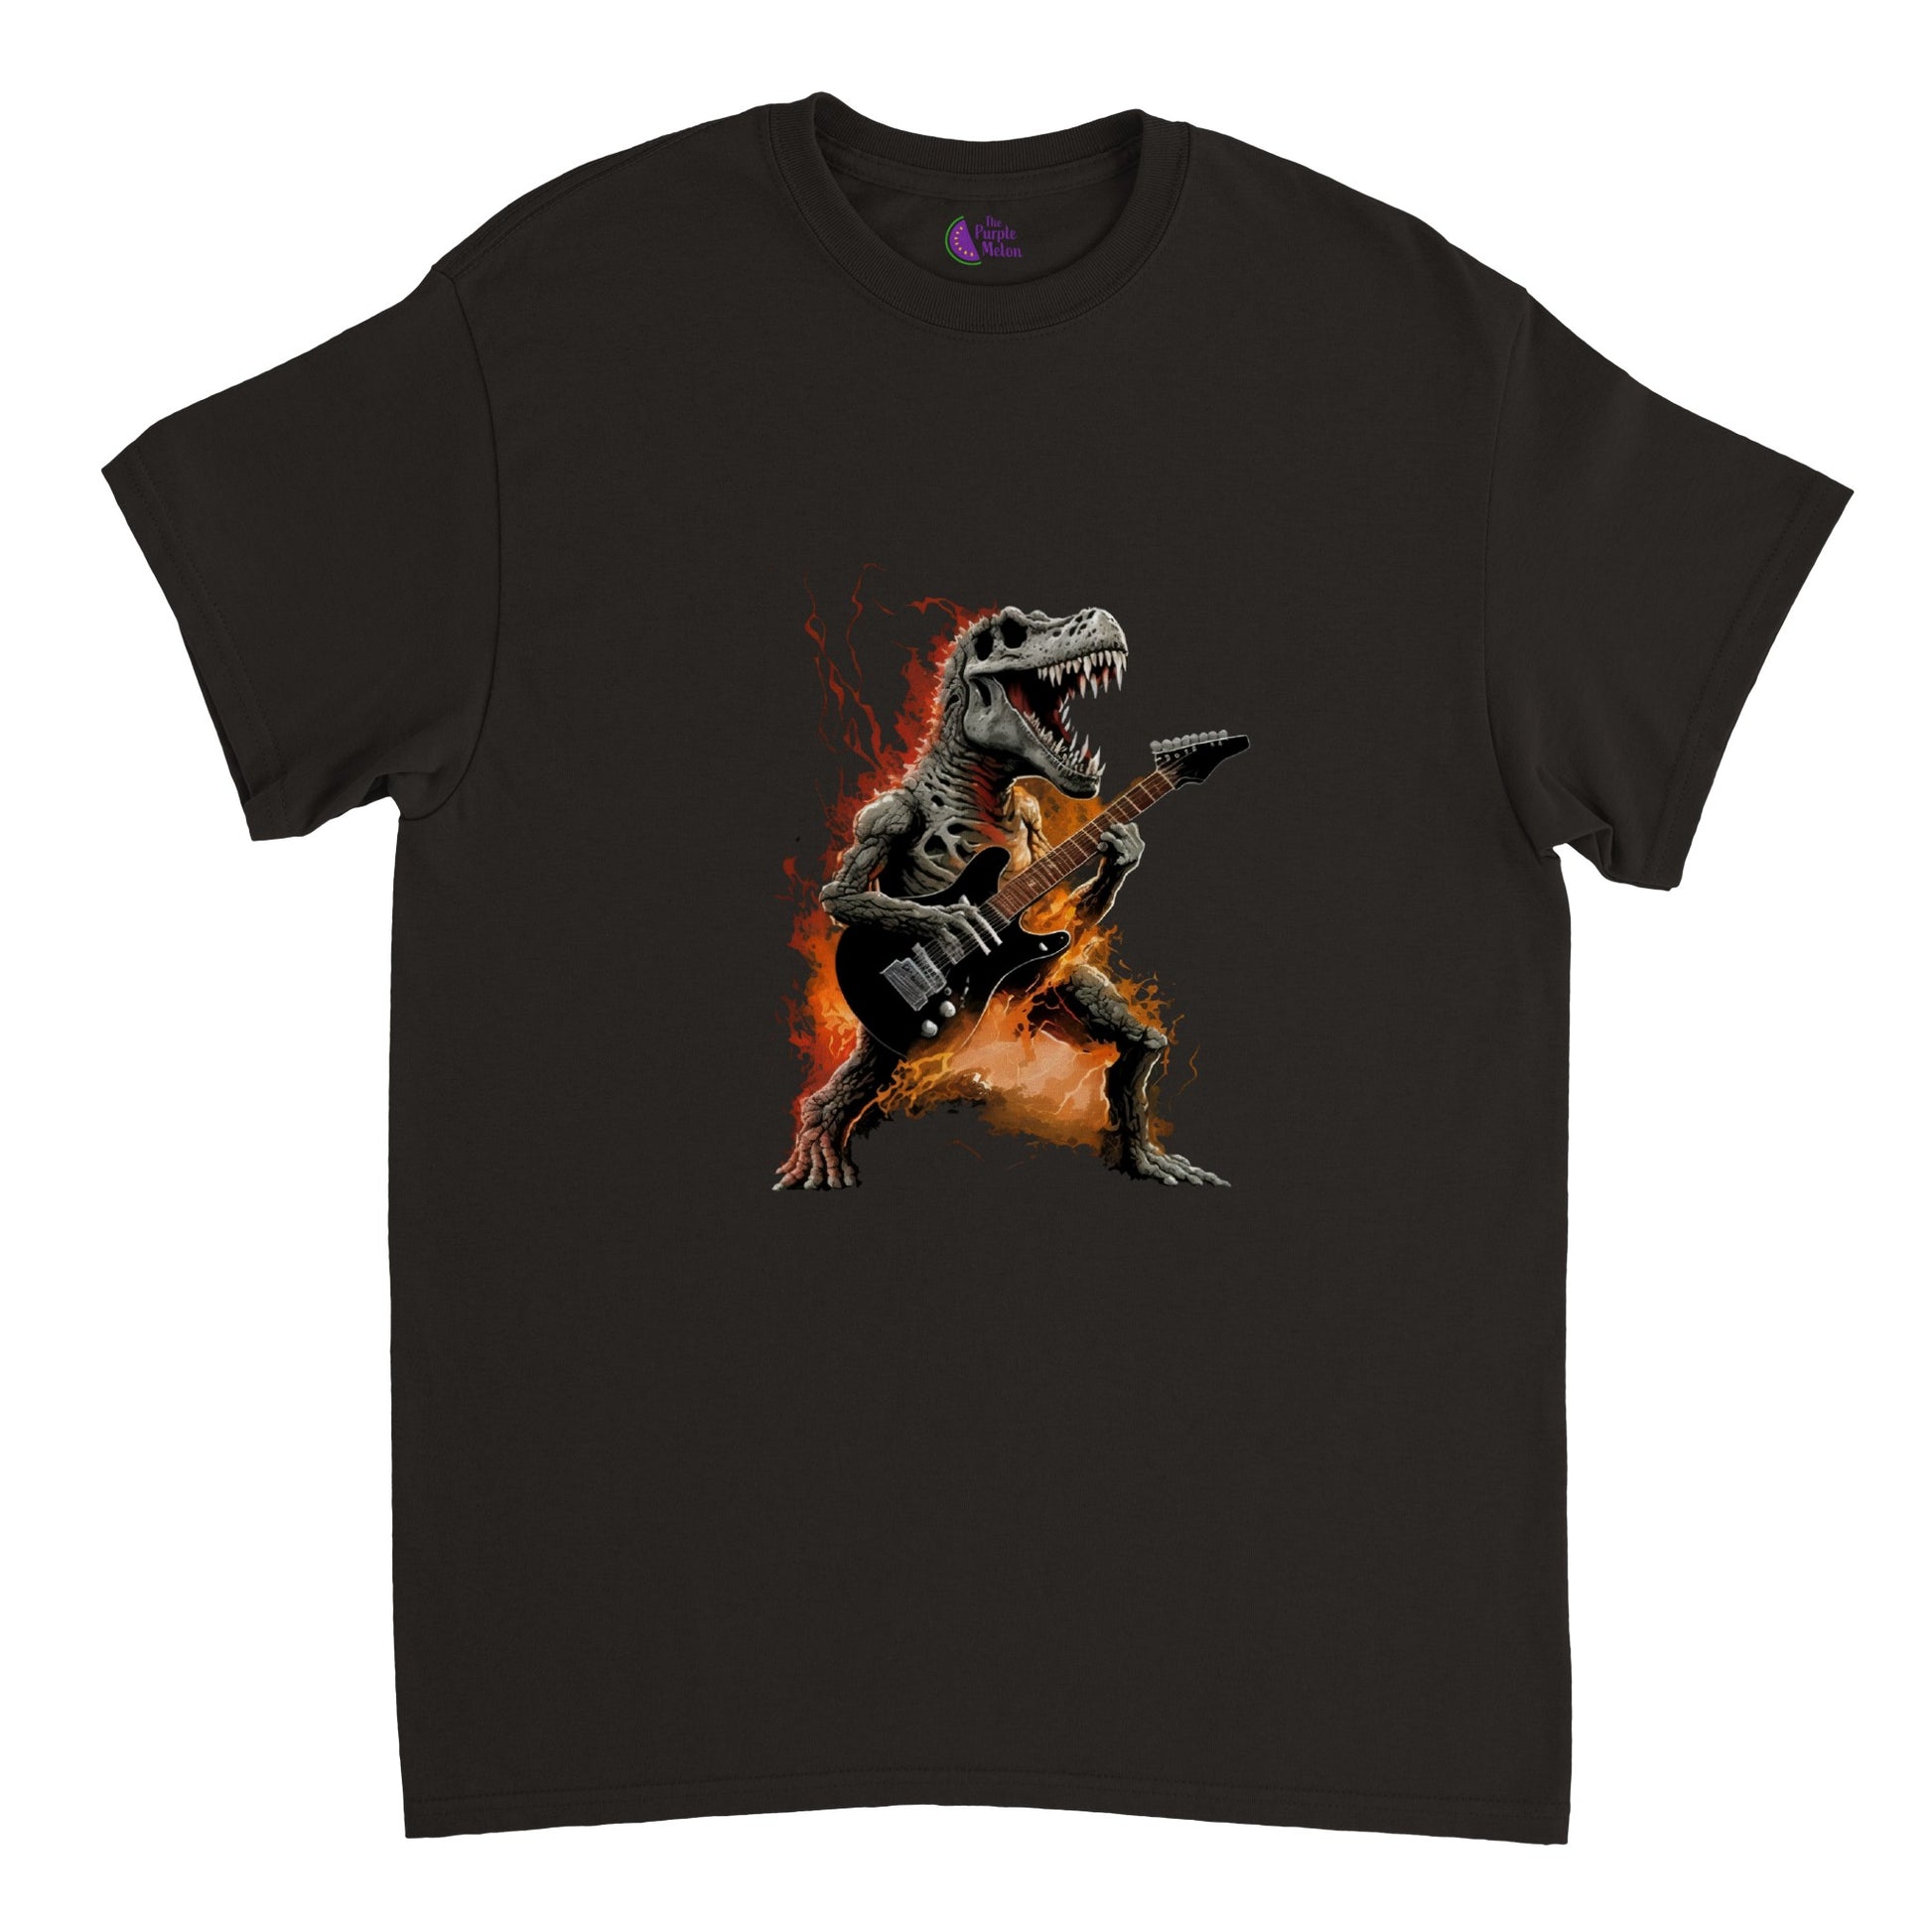 black t-shirt with a flaming t-rex playing the guitar graphic